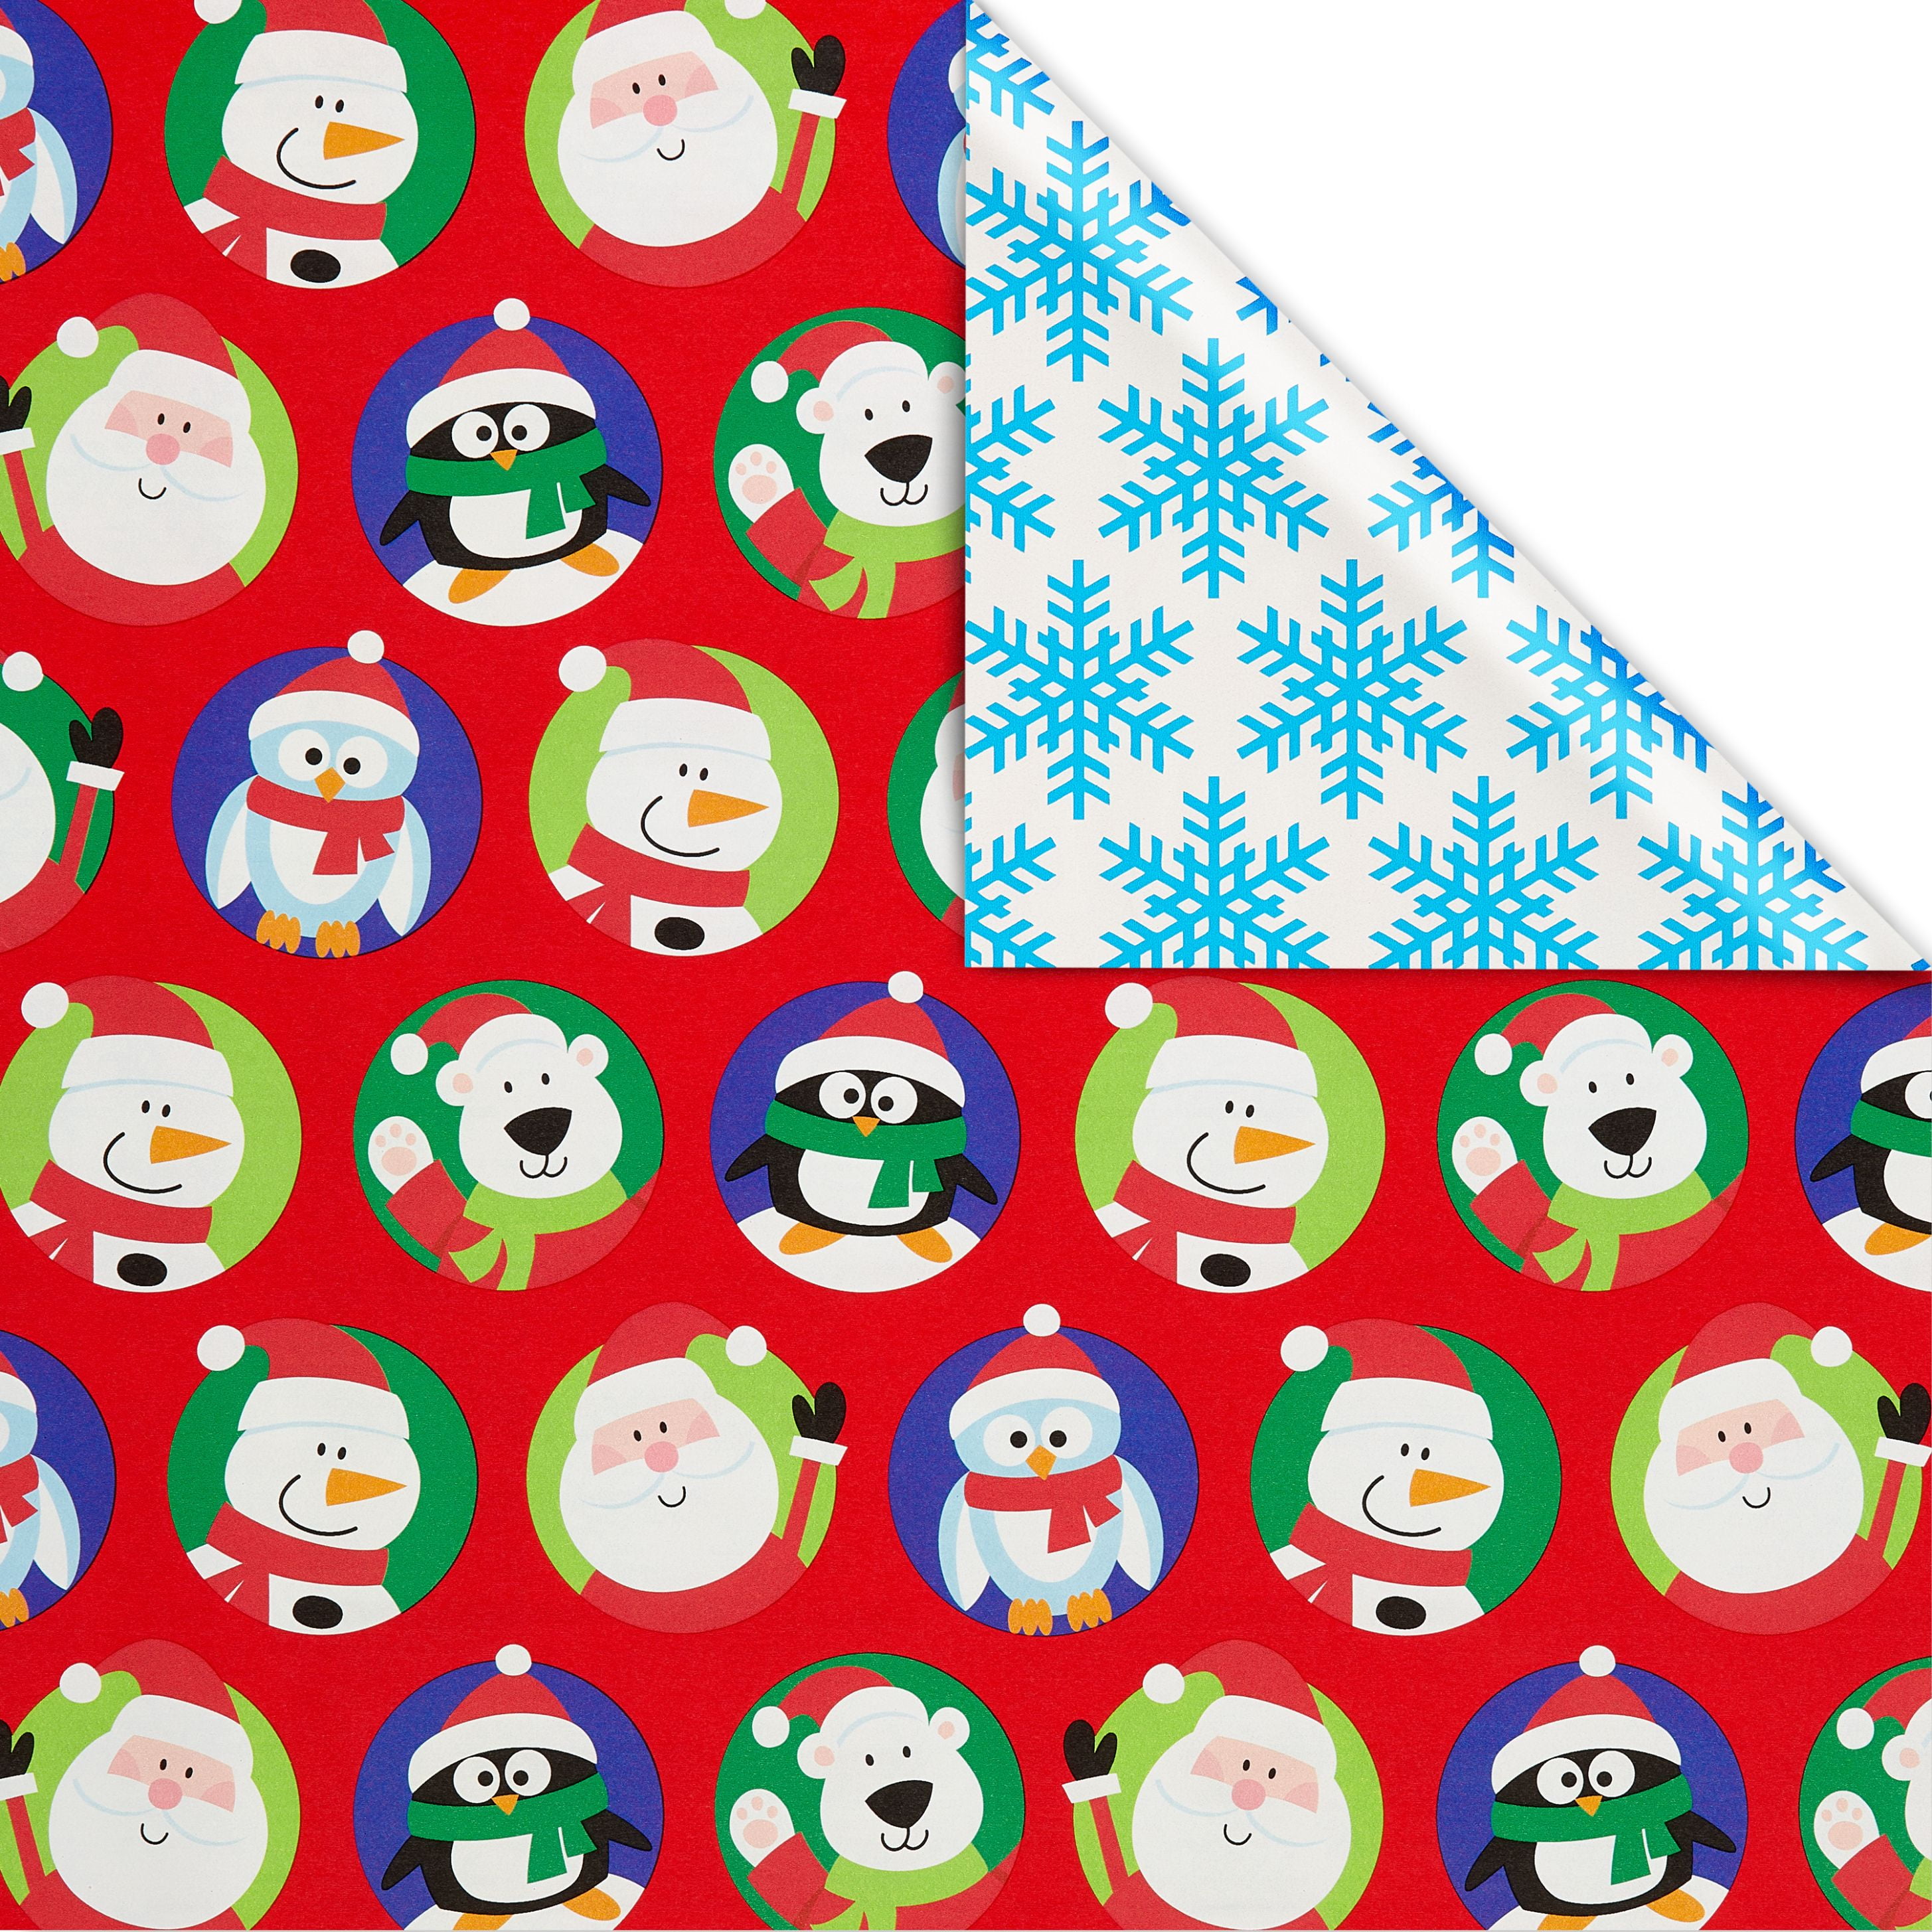 American Greetings 175 Sq. ft. Reversible Silver and Black Christmas Wrapping Paper, Santa Sleigh and Merry Christmas Tree (1 Jumbo Roll 30 in. x 70